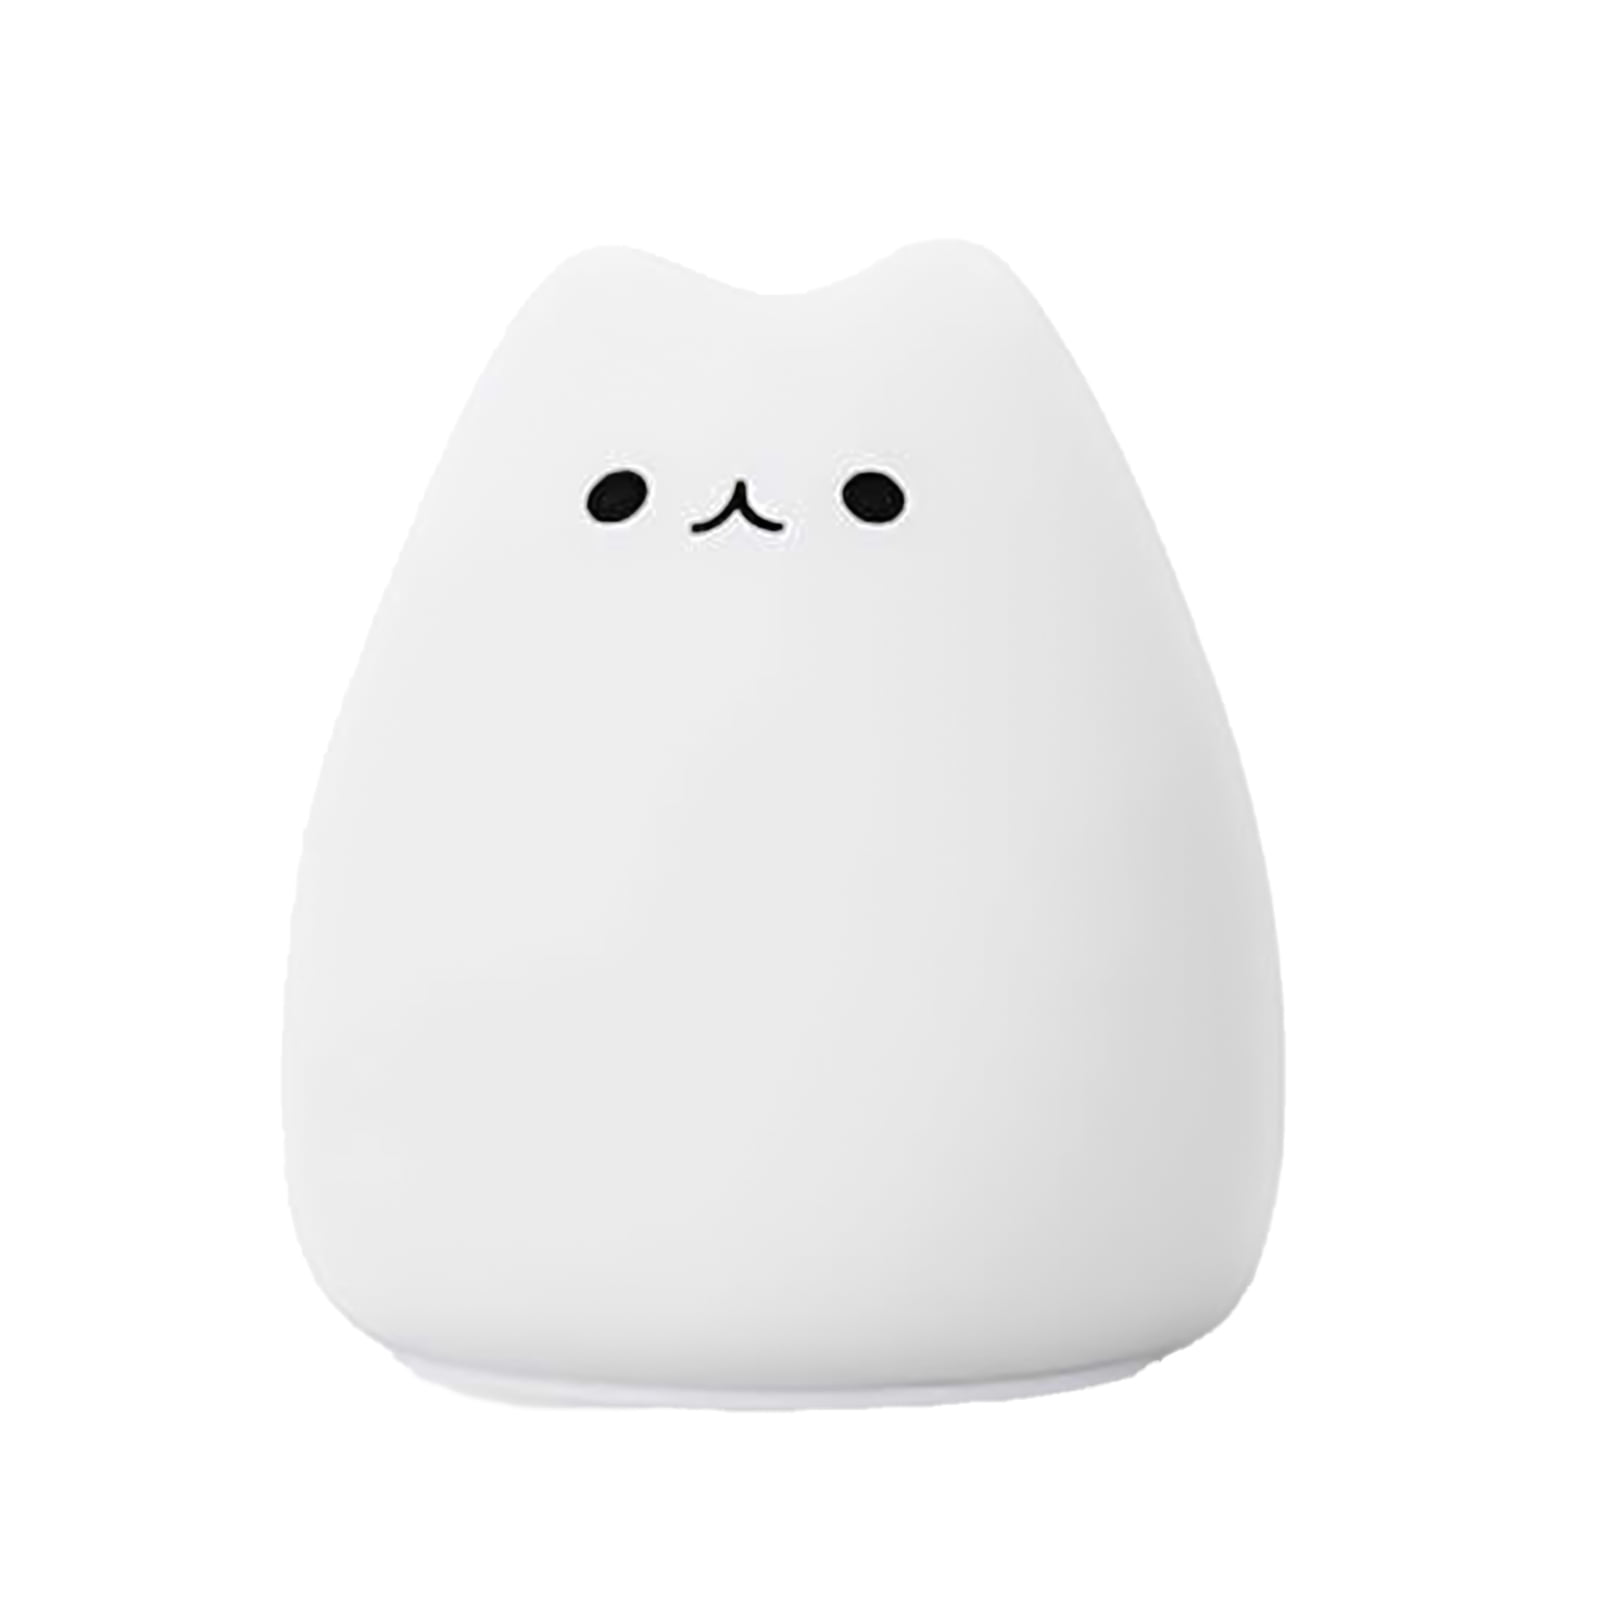 Details about   Cat LED Touch Sensor Night Light Cute 7 Colors Children Bedroom Lamp Silicon US 